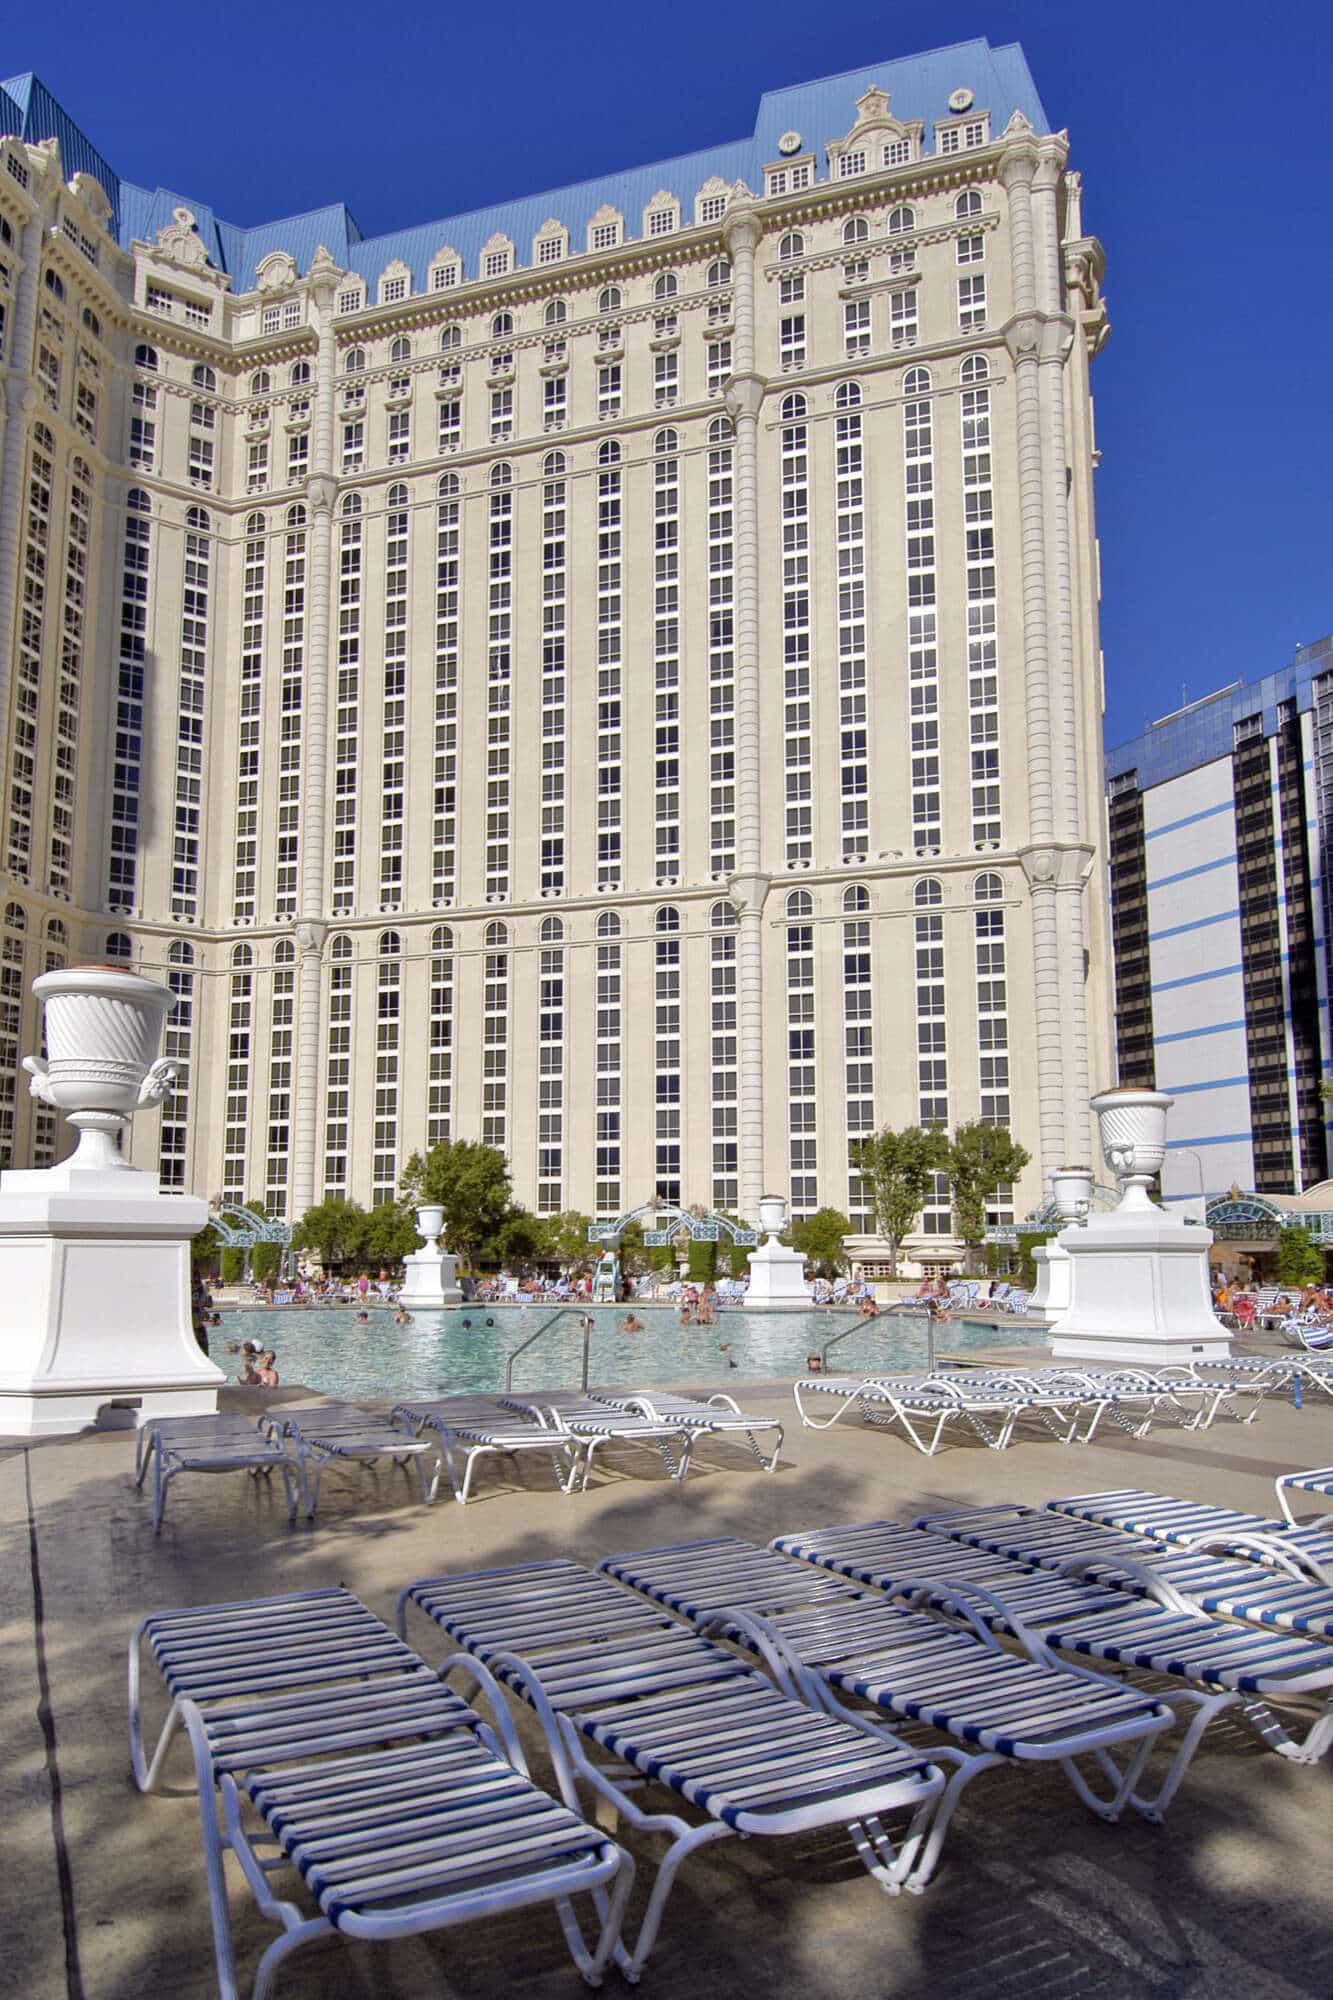 Relaxing lounge chairs by the Soleil Pool with a serene ambiance at Paris Las Vegas Hotel.